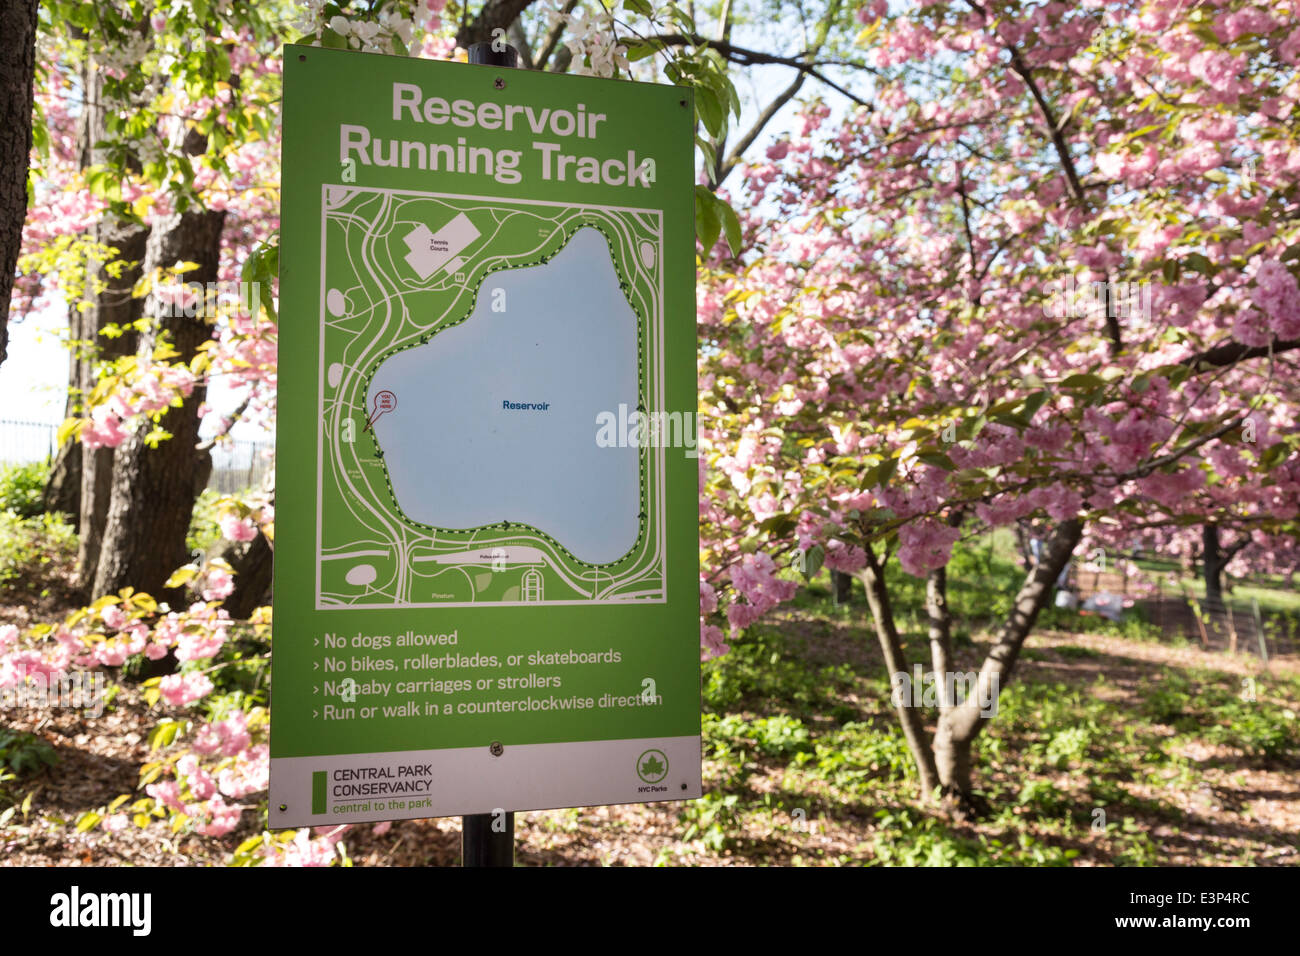 Reservoir Stephanie and Fred Shuman Running Track Sign in Blooming Trees of Springtime, Central park, NYC, USA Stock Photo